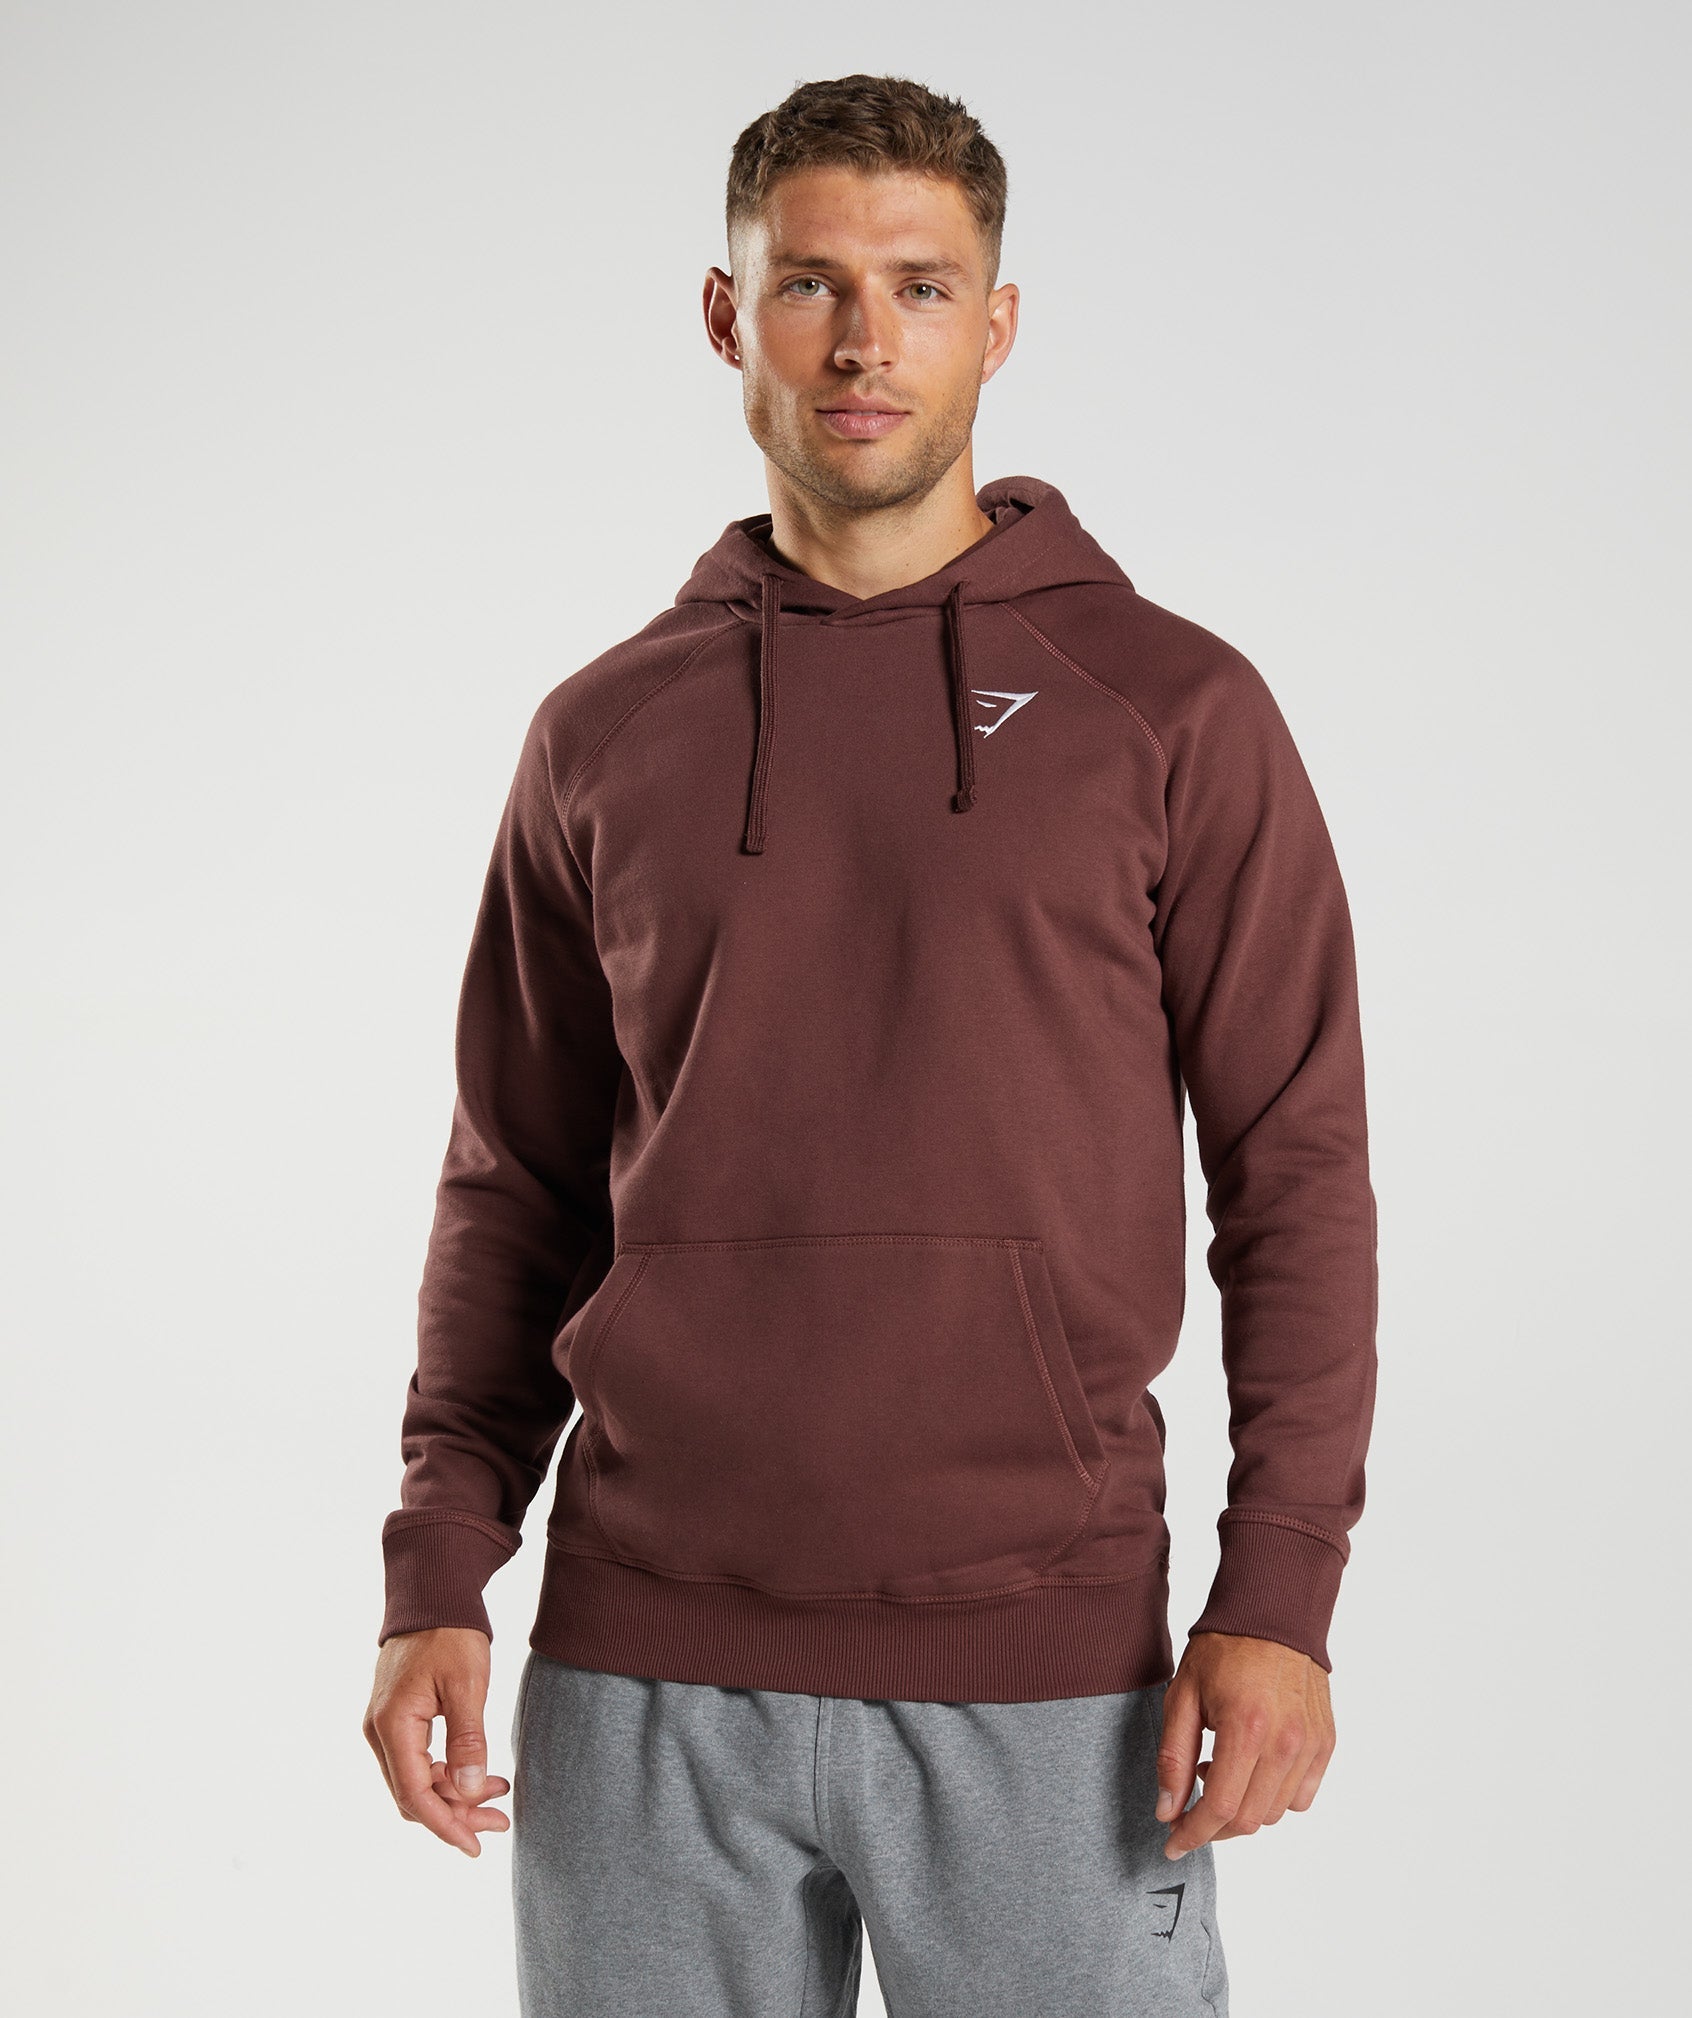 Crest Hoodie in Cherry Brown - view 1